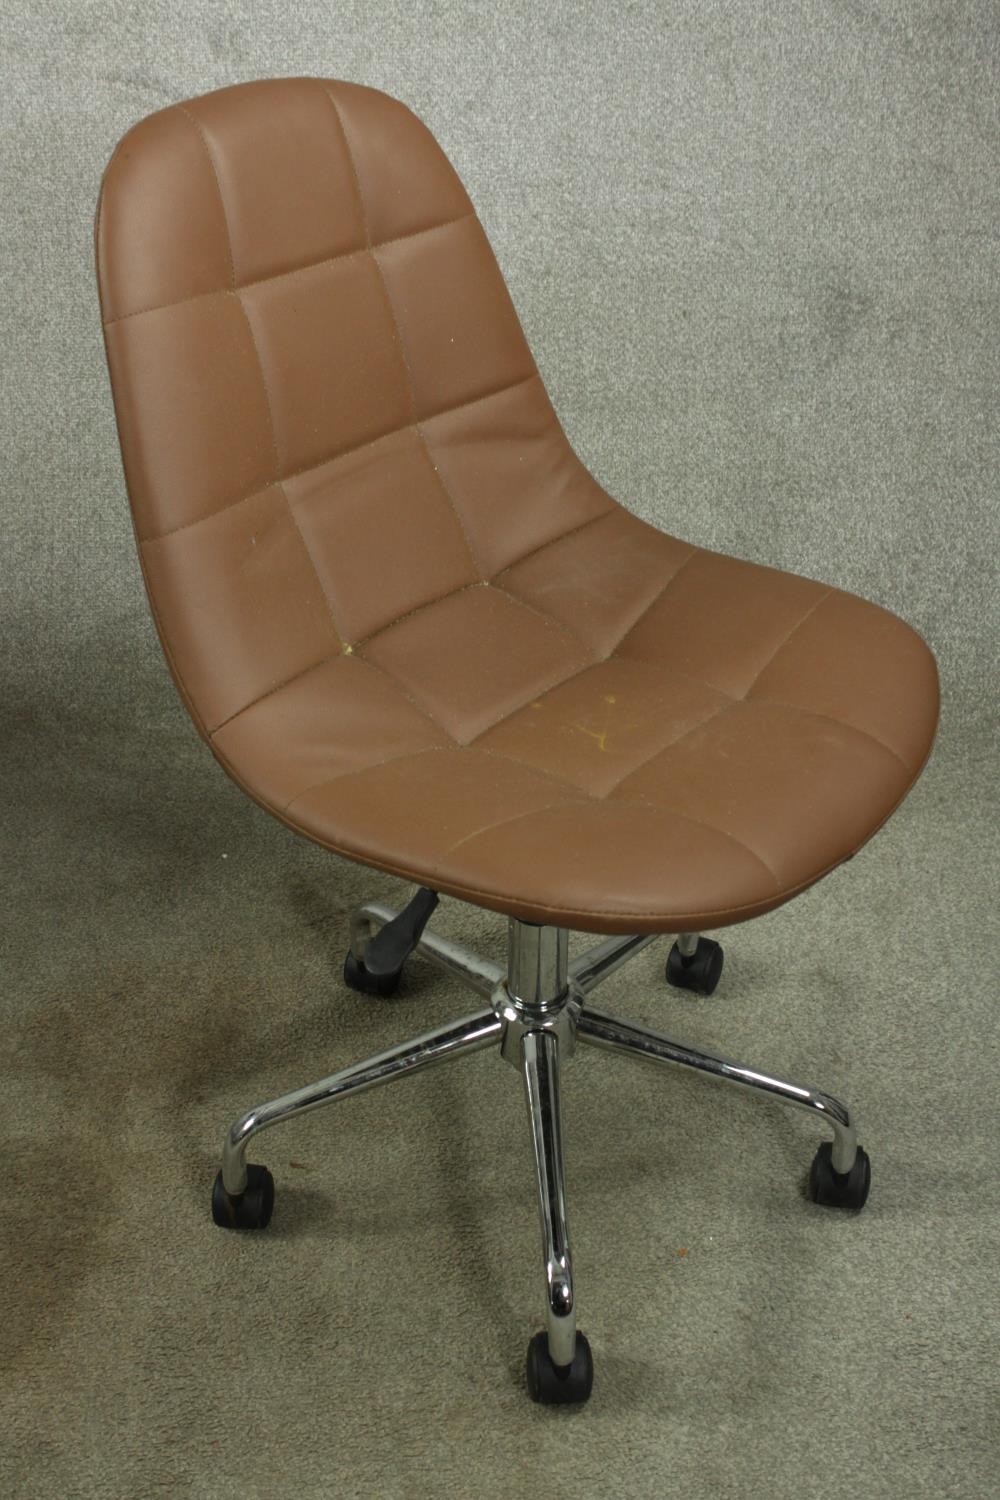 A pair of vintage style faux leather swivel chairs. - Image 3 of 4